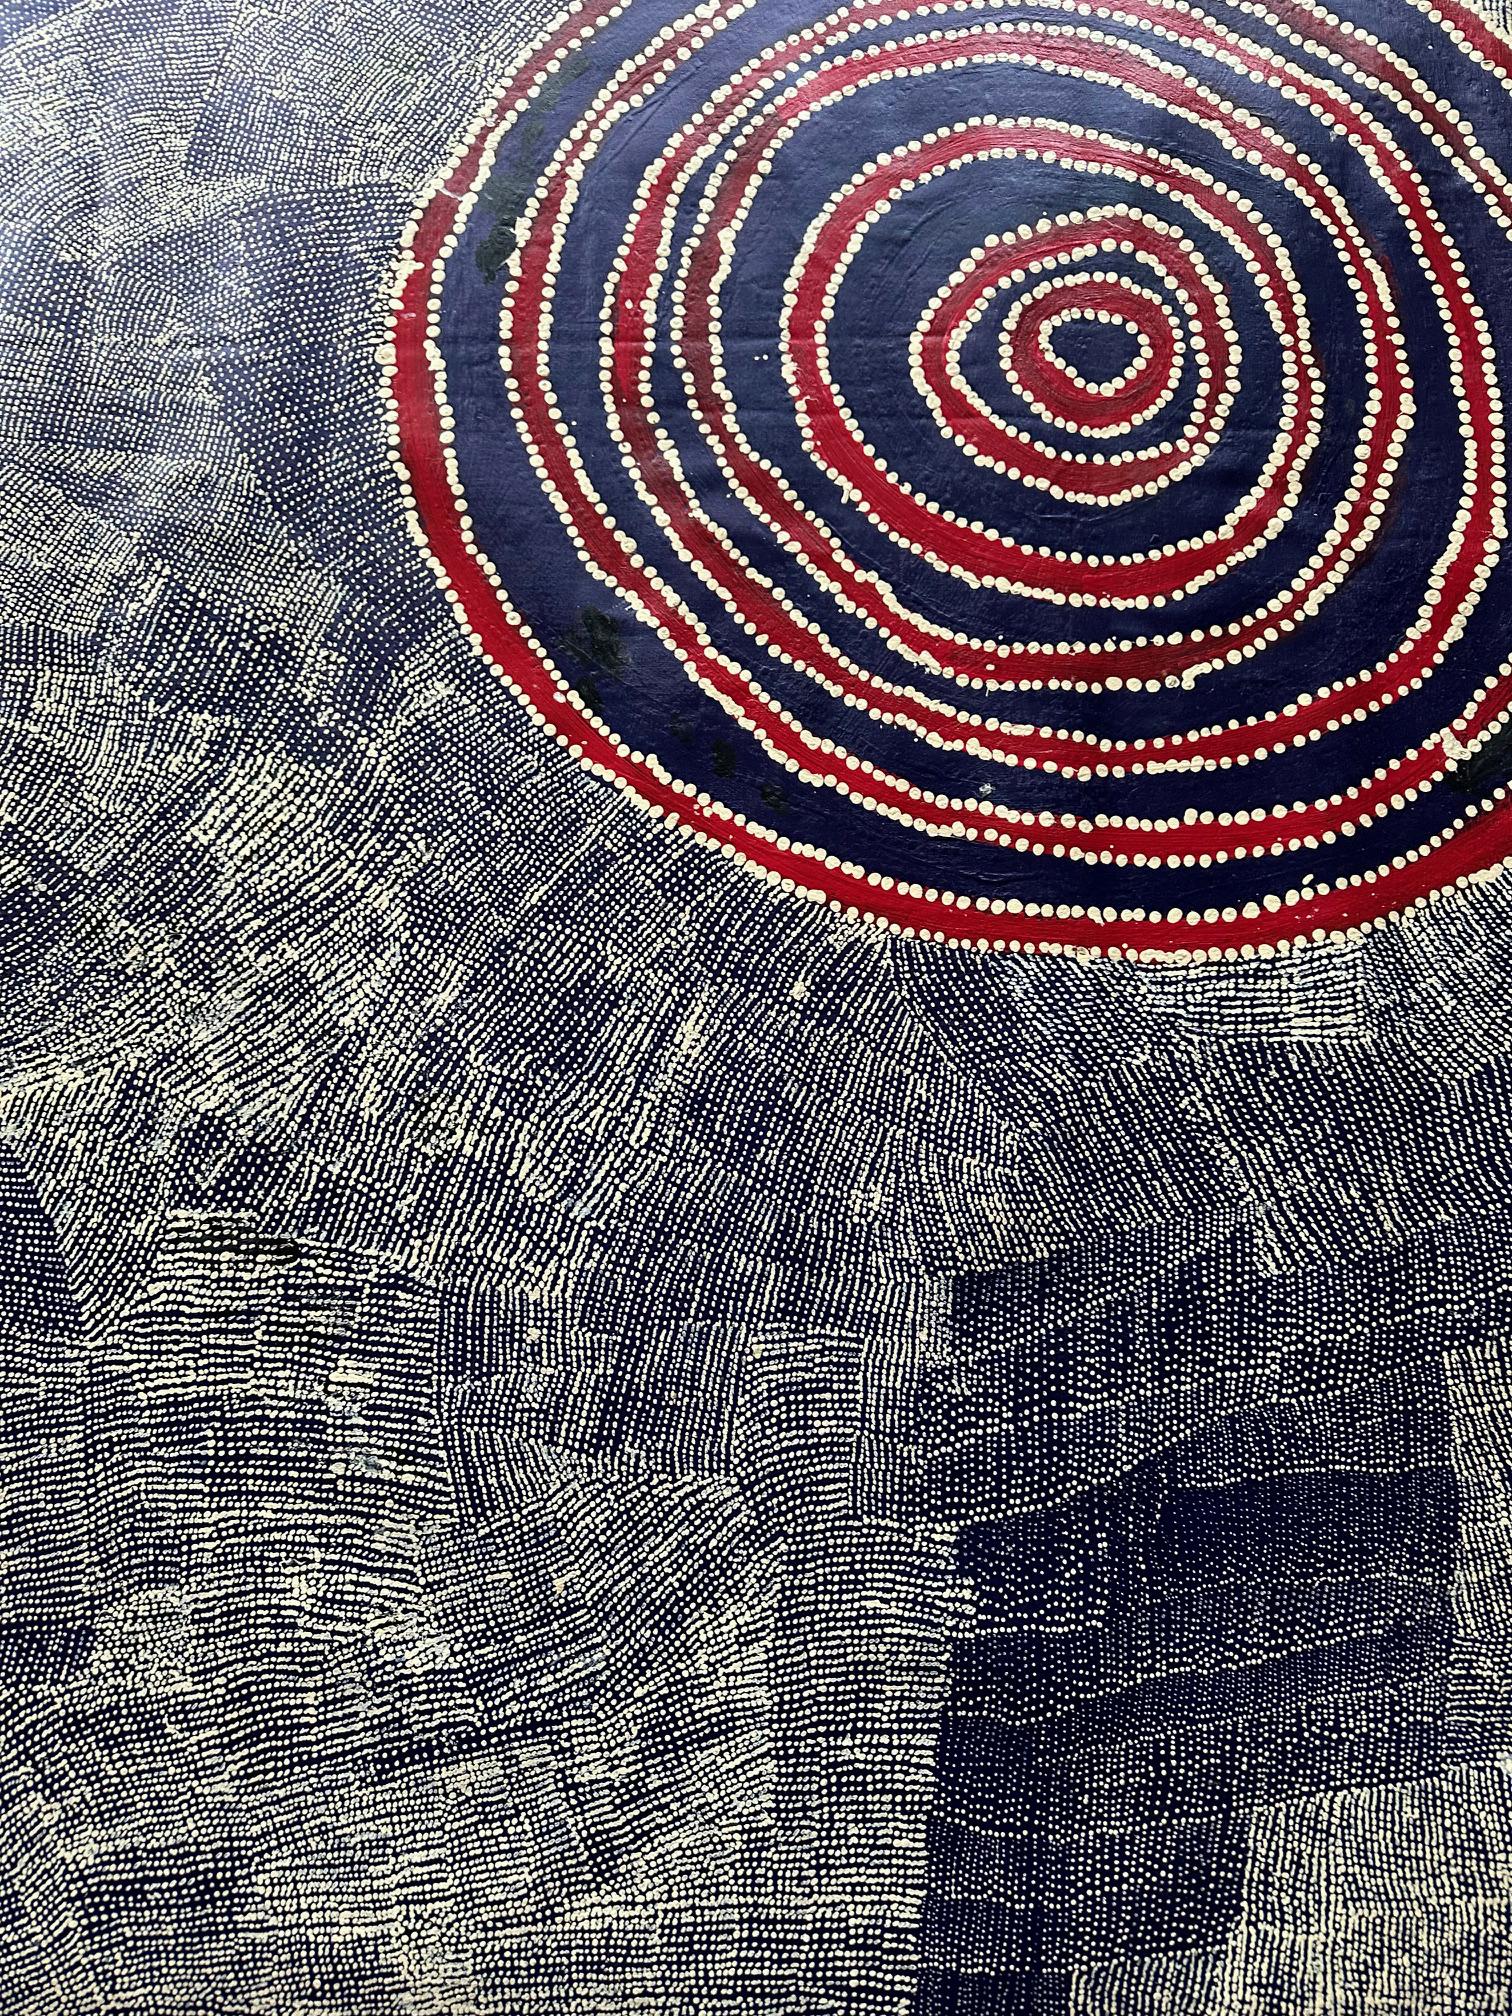 A stunning abstract painting by Australian Aboriginal artist Wentja Napaltjarri (c1945 - 2021) entitled Rockhole West of Kintore, the work depicts the artist's ancestral land in Dreamtime. Diminated the painting, the concentric form is the site of